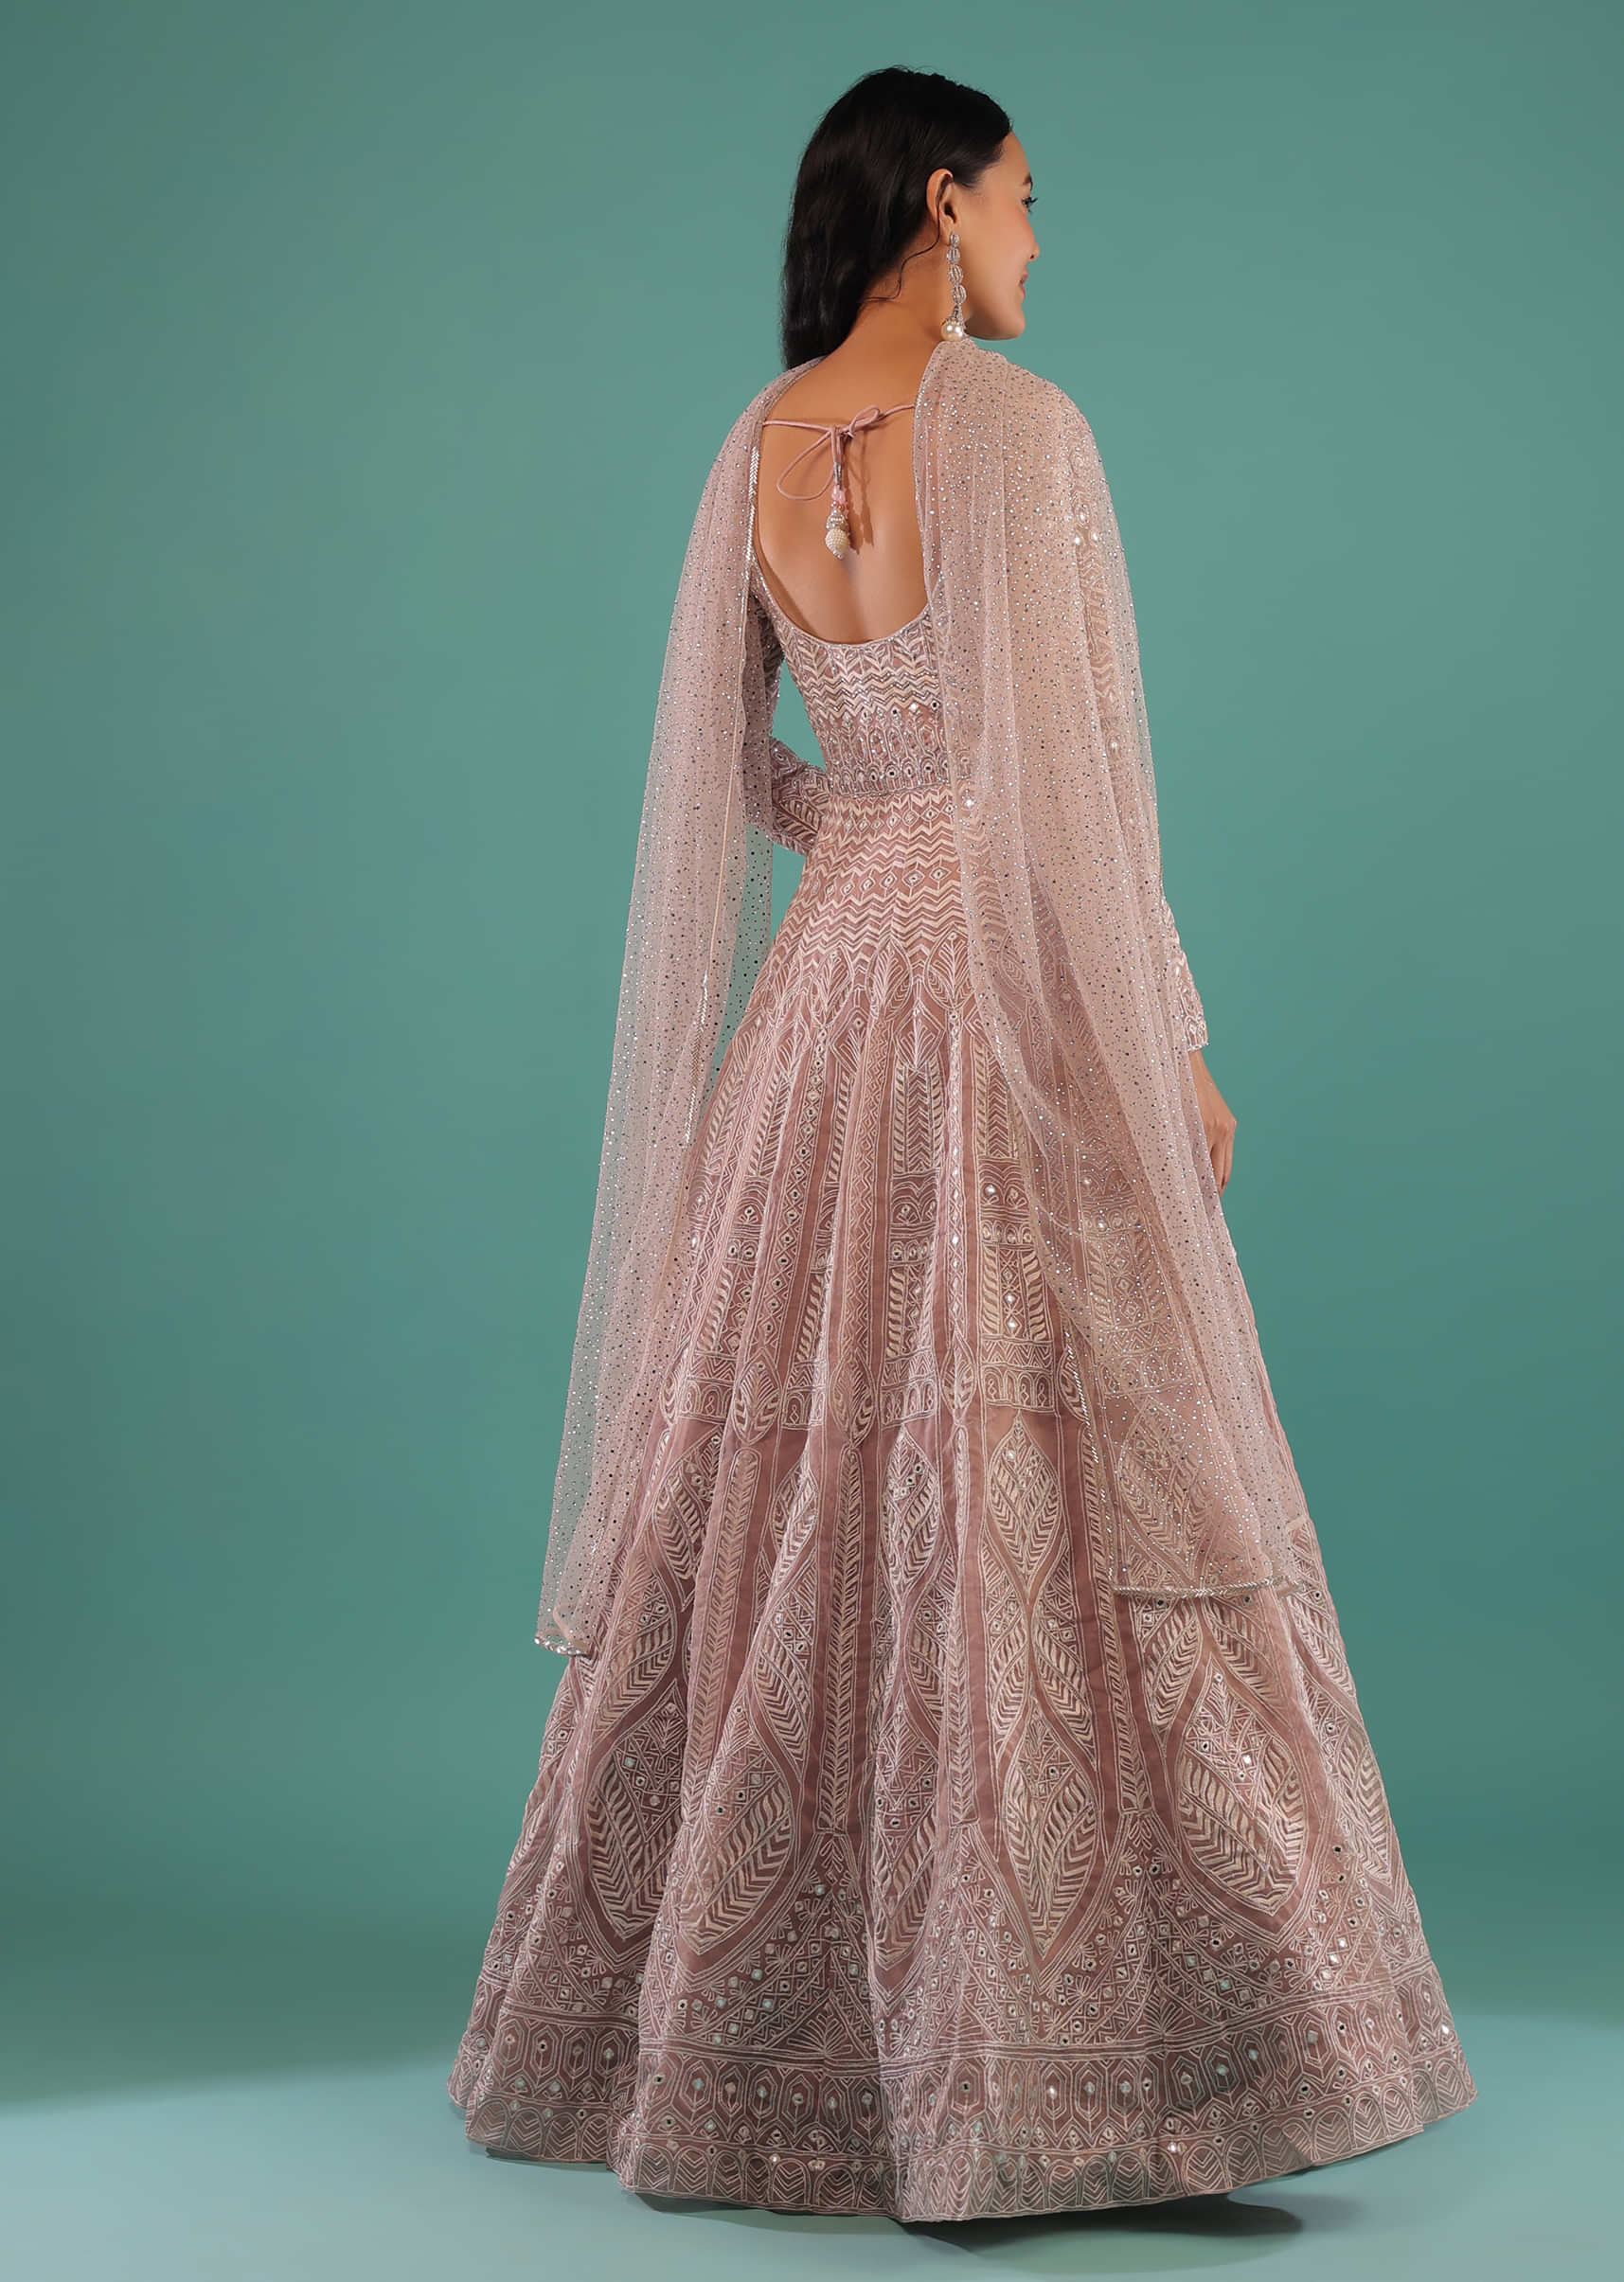 Nude Pink Anarkali Suit With Aari Embroidery All Over And Abla Accents